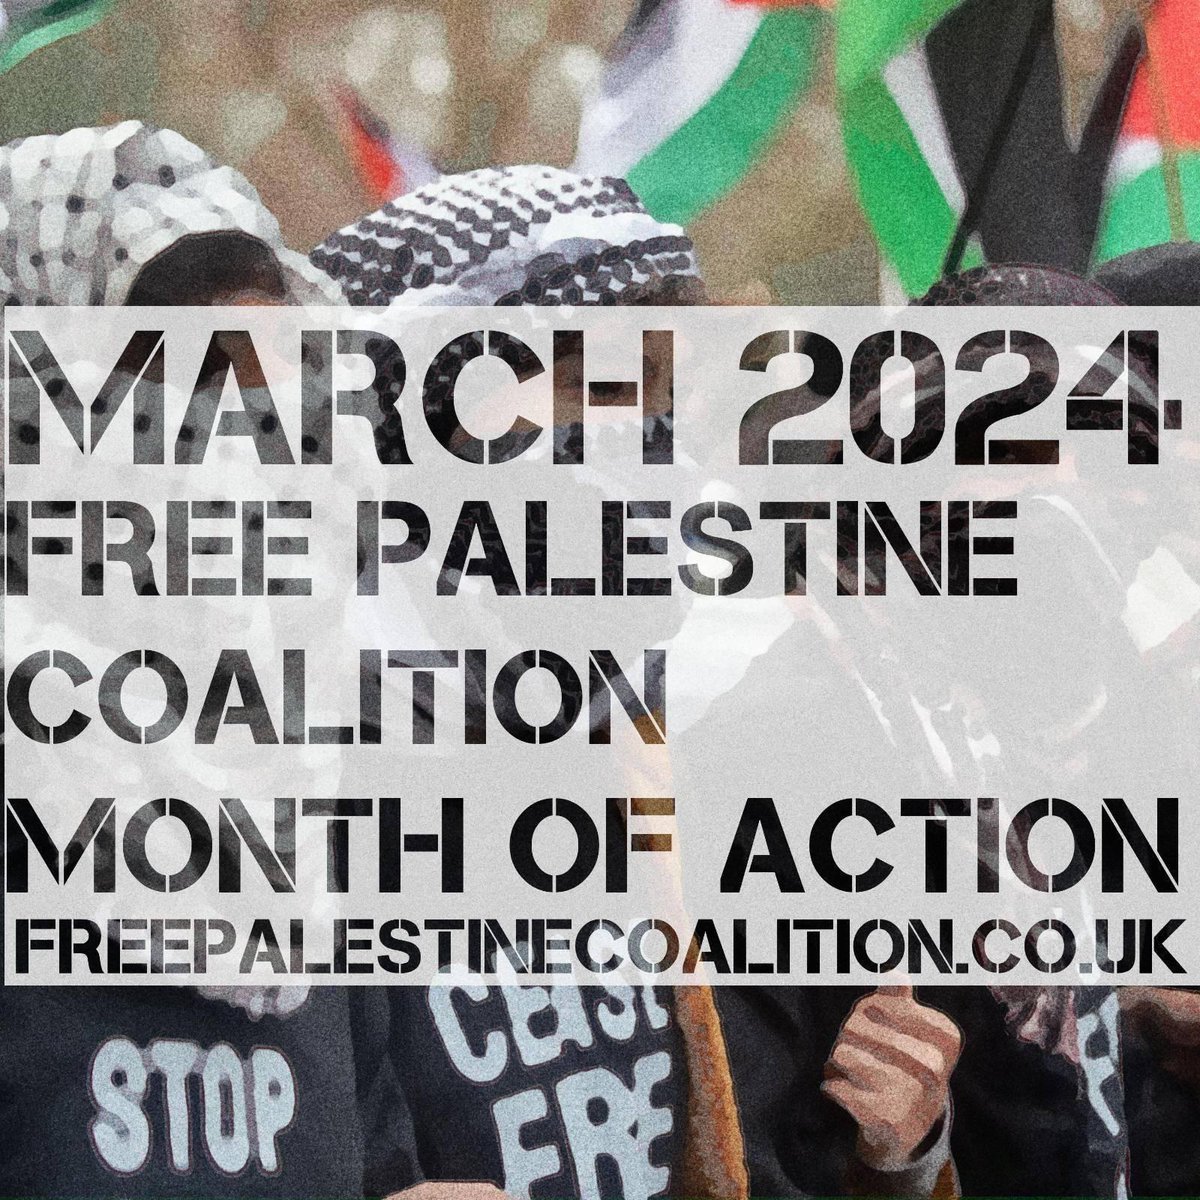 🚨March 2024 is a Free Palestine Coalition month of action! 📢We will keep taking to the streets for Palestine until our demands are met 🇵🇸 Ceasefire Now, Stop Arming Israel, End the Occupation, Lift the Siege on Gaza! 🔥Public actions listed at freepalestinecoalition.co.uk